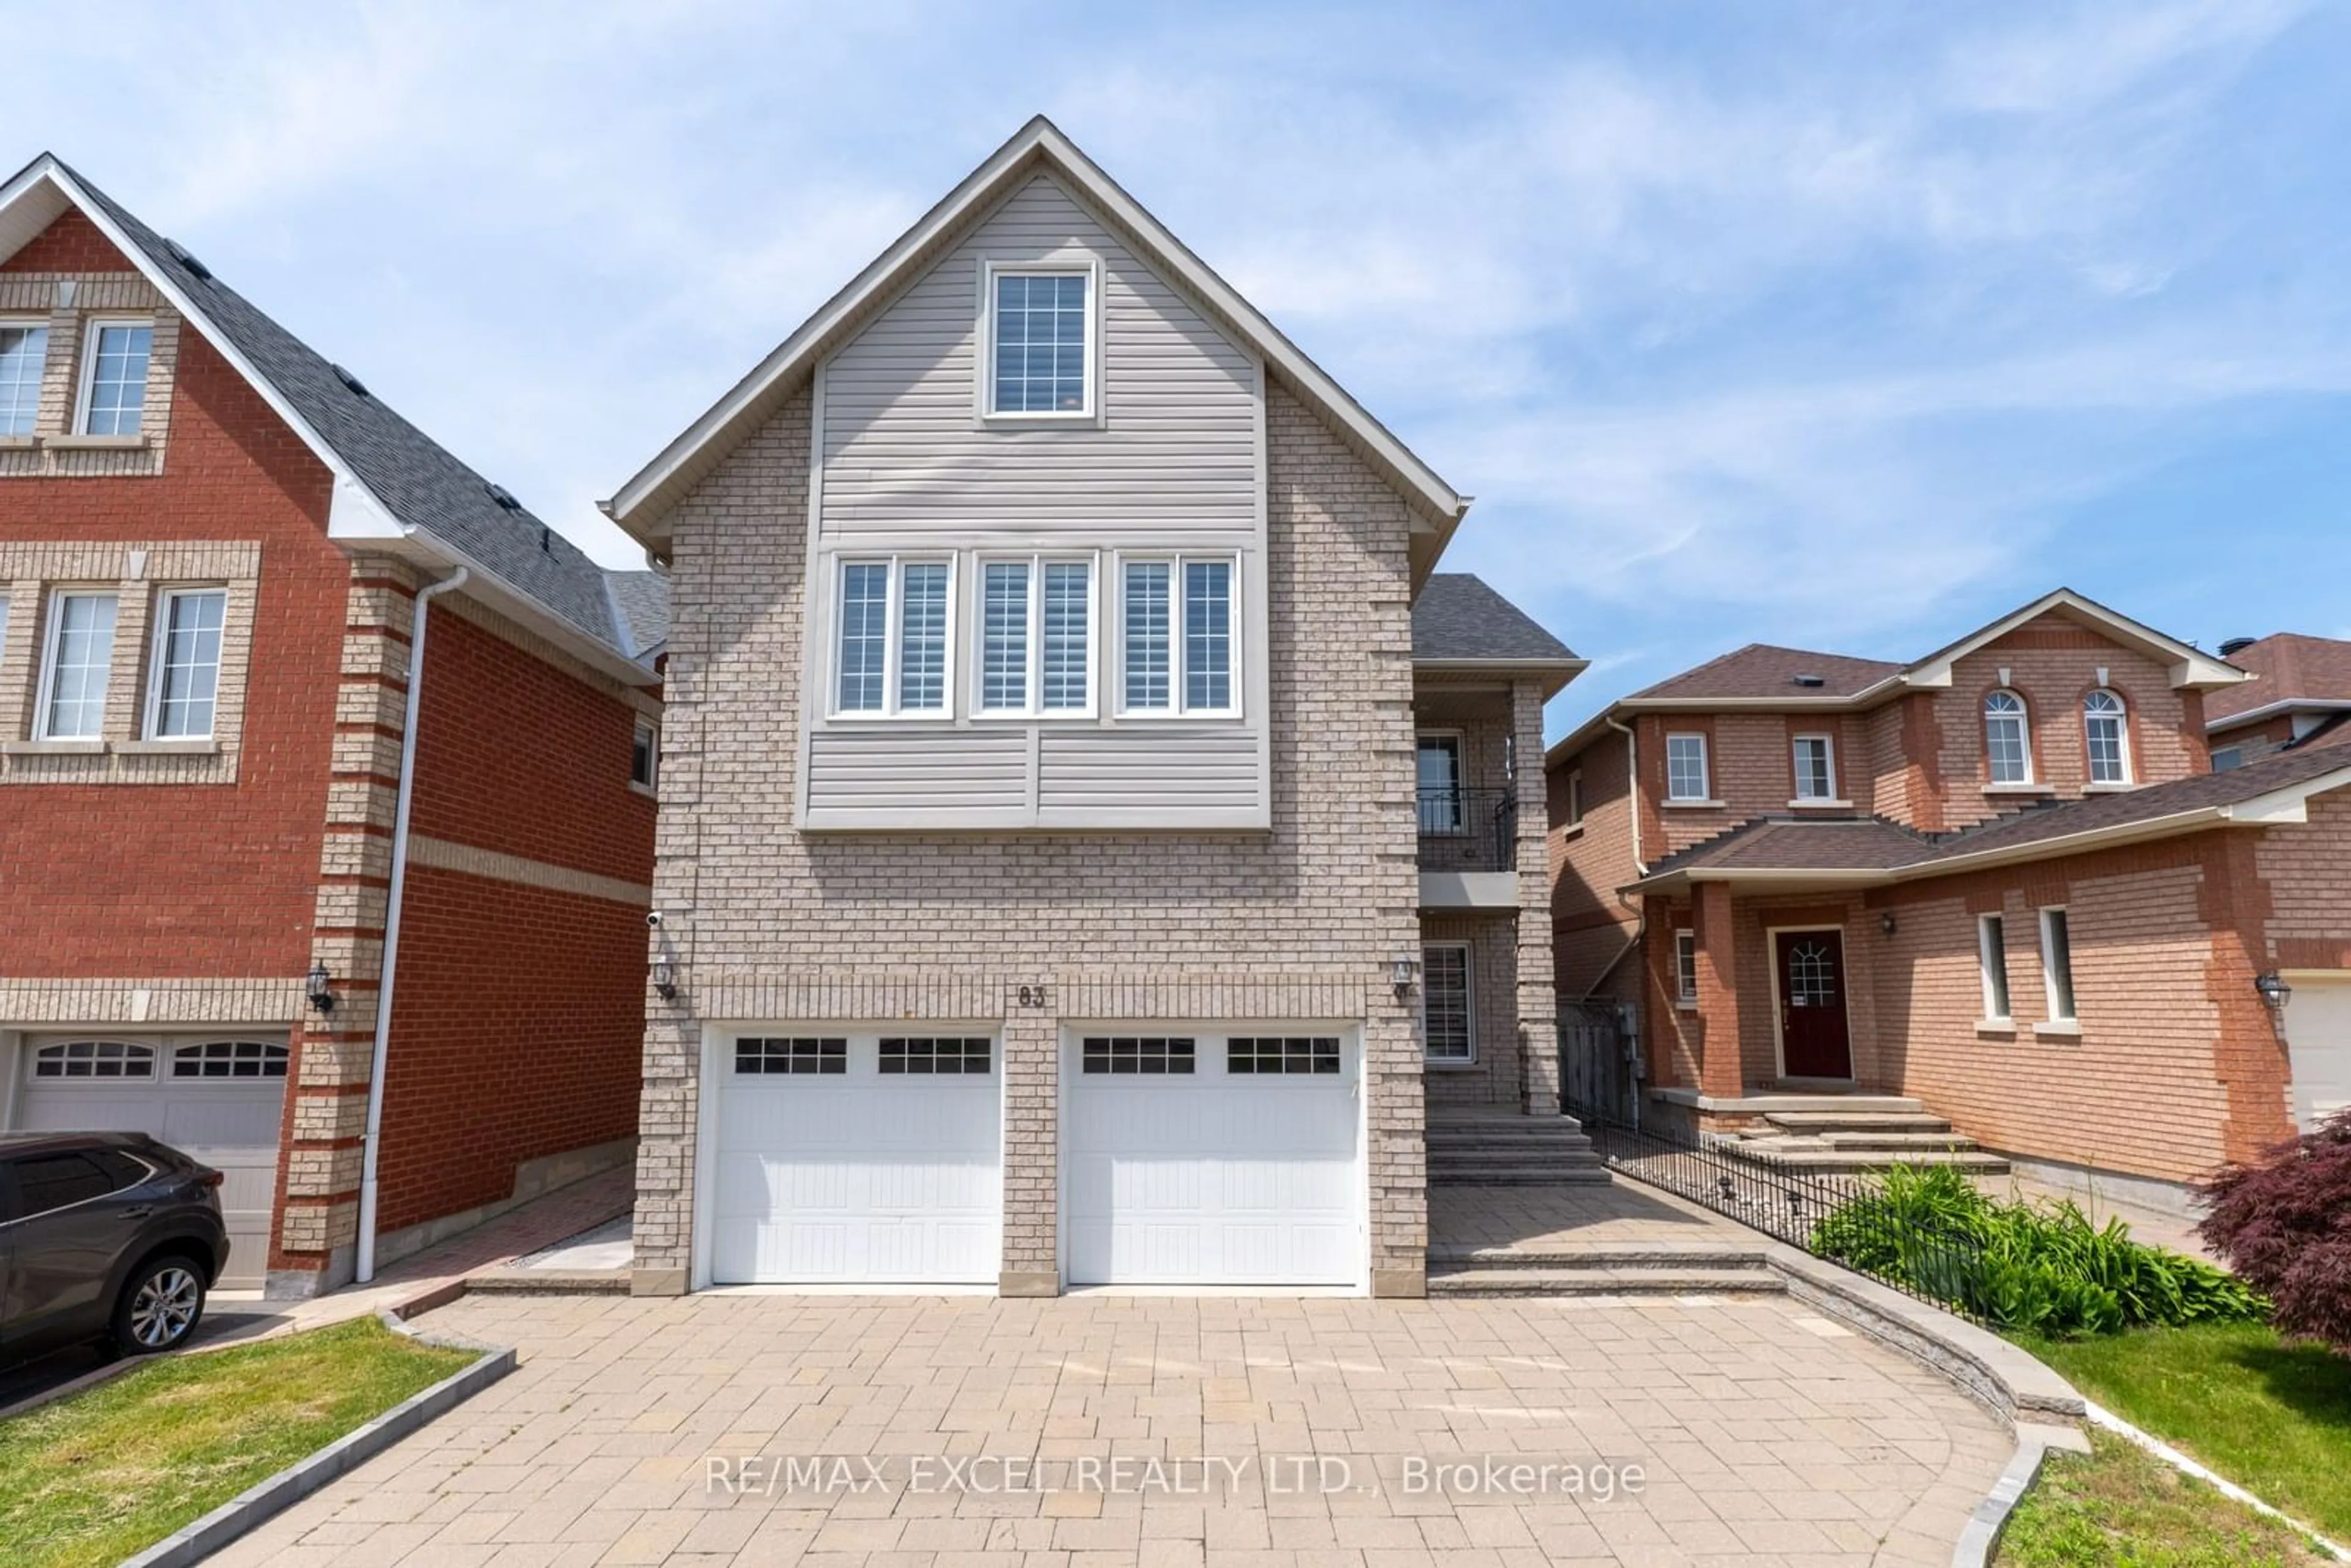 Home with brick exterior material for 83 Eastpine Dr, Markham Ontario L3R 4T2